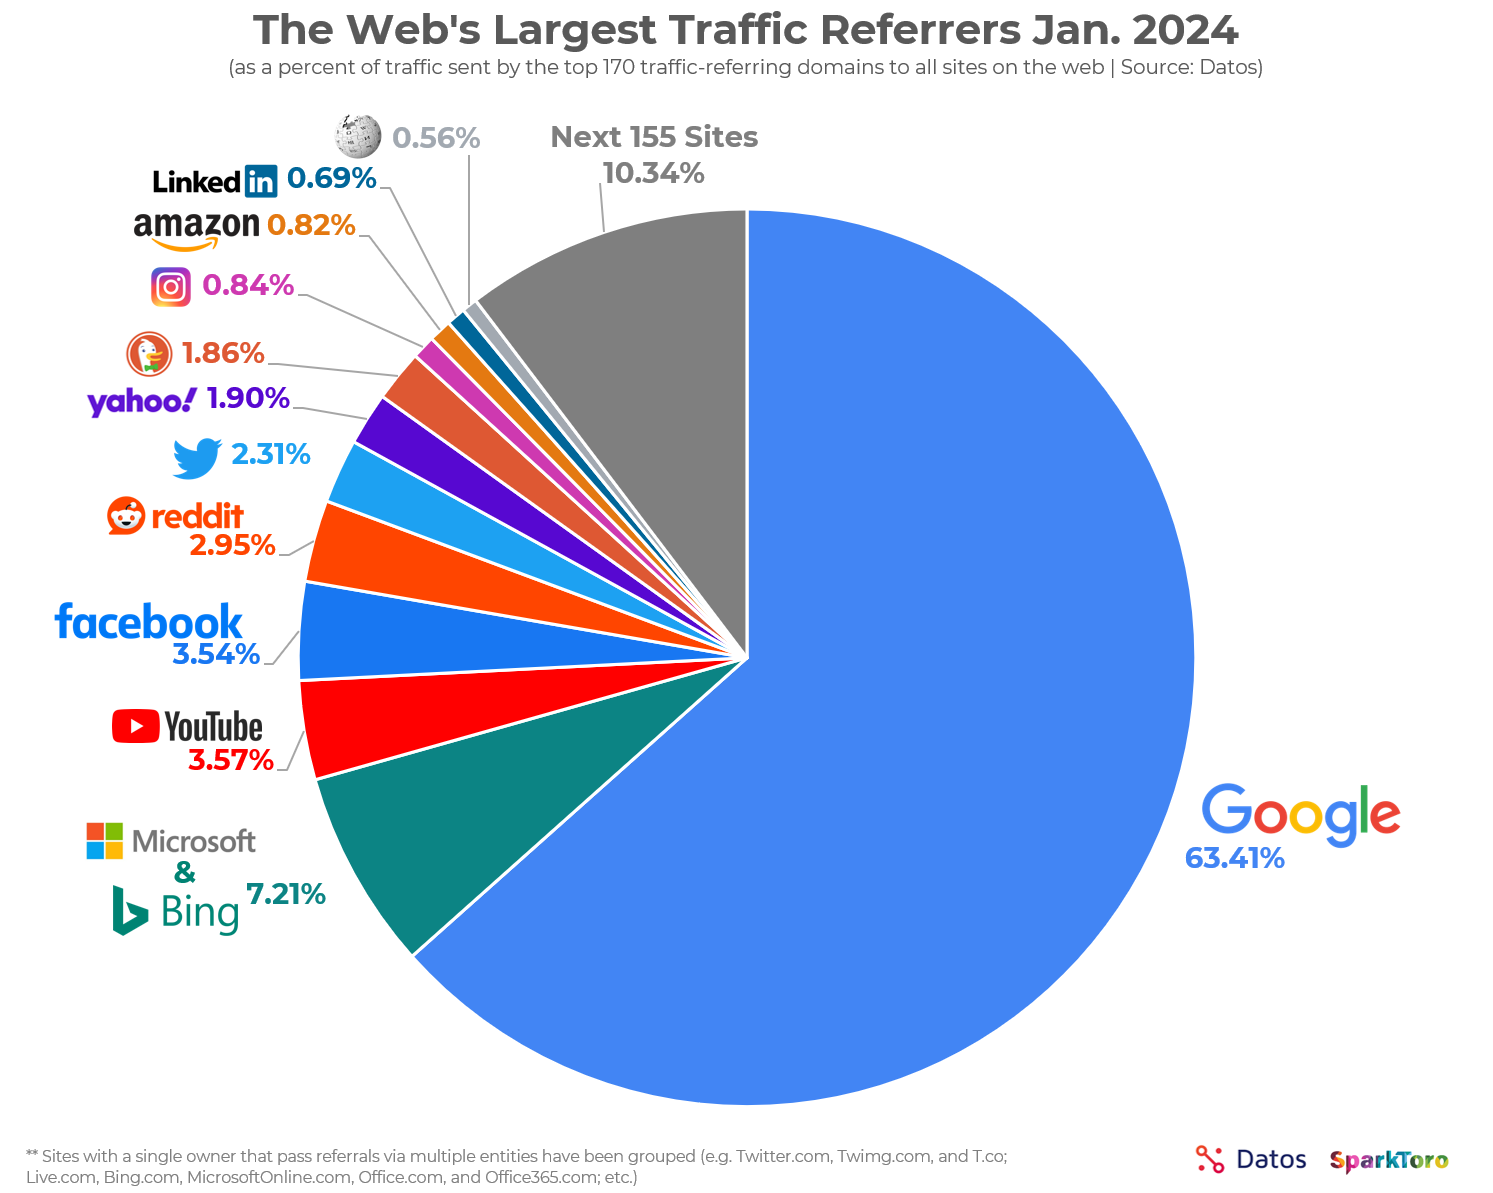 A circle graph highlighting the web's largest traffic refferers in Jan 2024, with Google being the largest at 63%